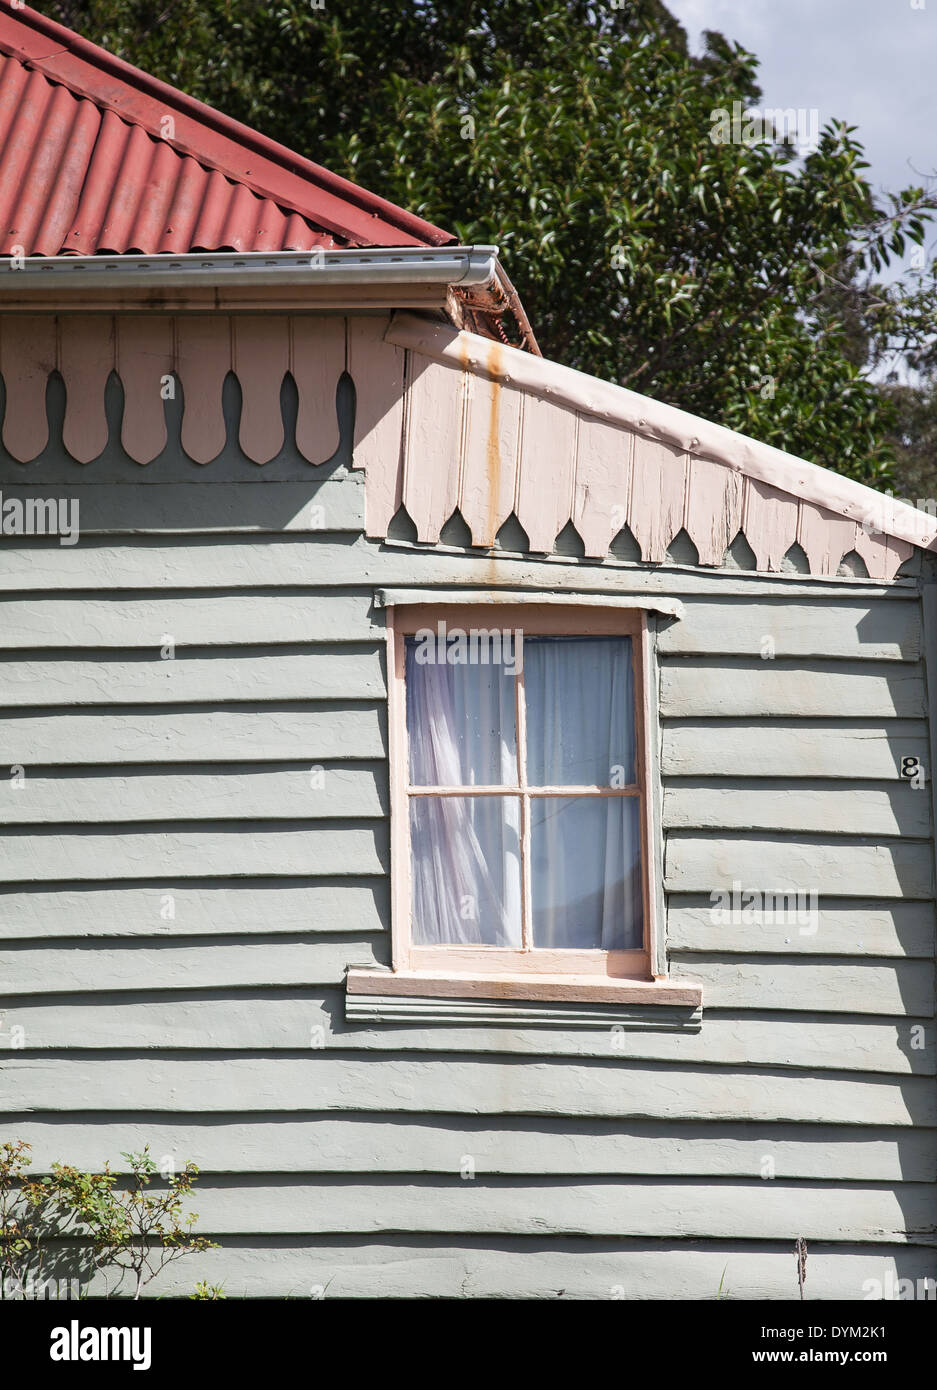 A part of a traditional wooden house in Tilba, New South Wales, Australia Stock Photo